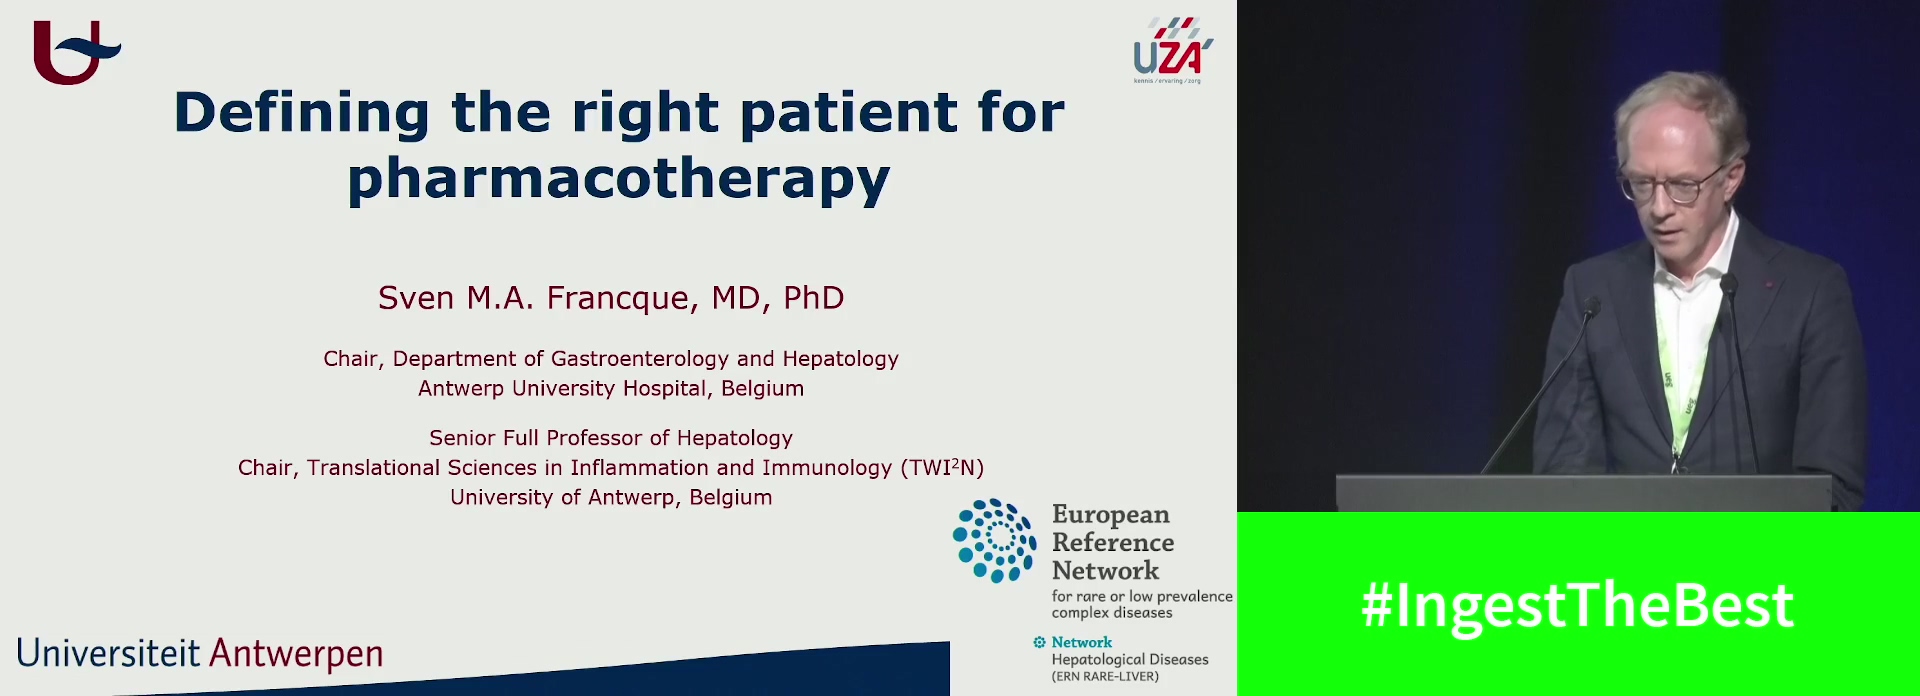 Defining the right patient for pharmacotherapy